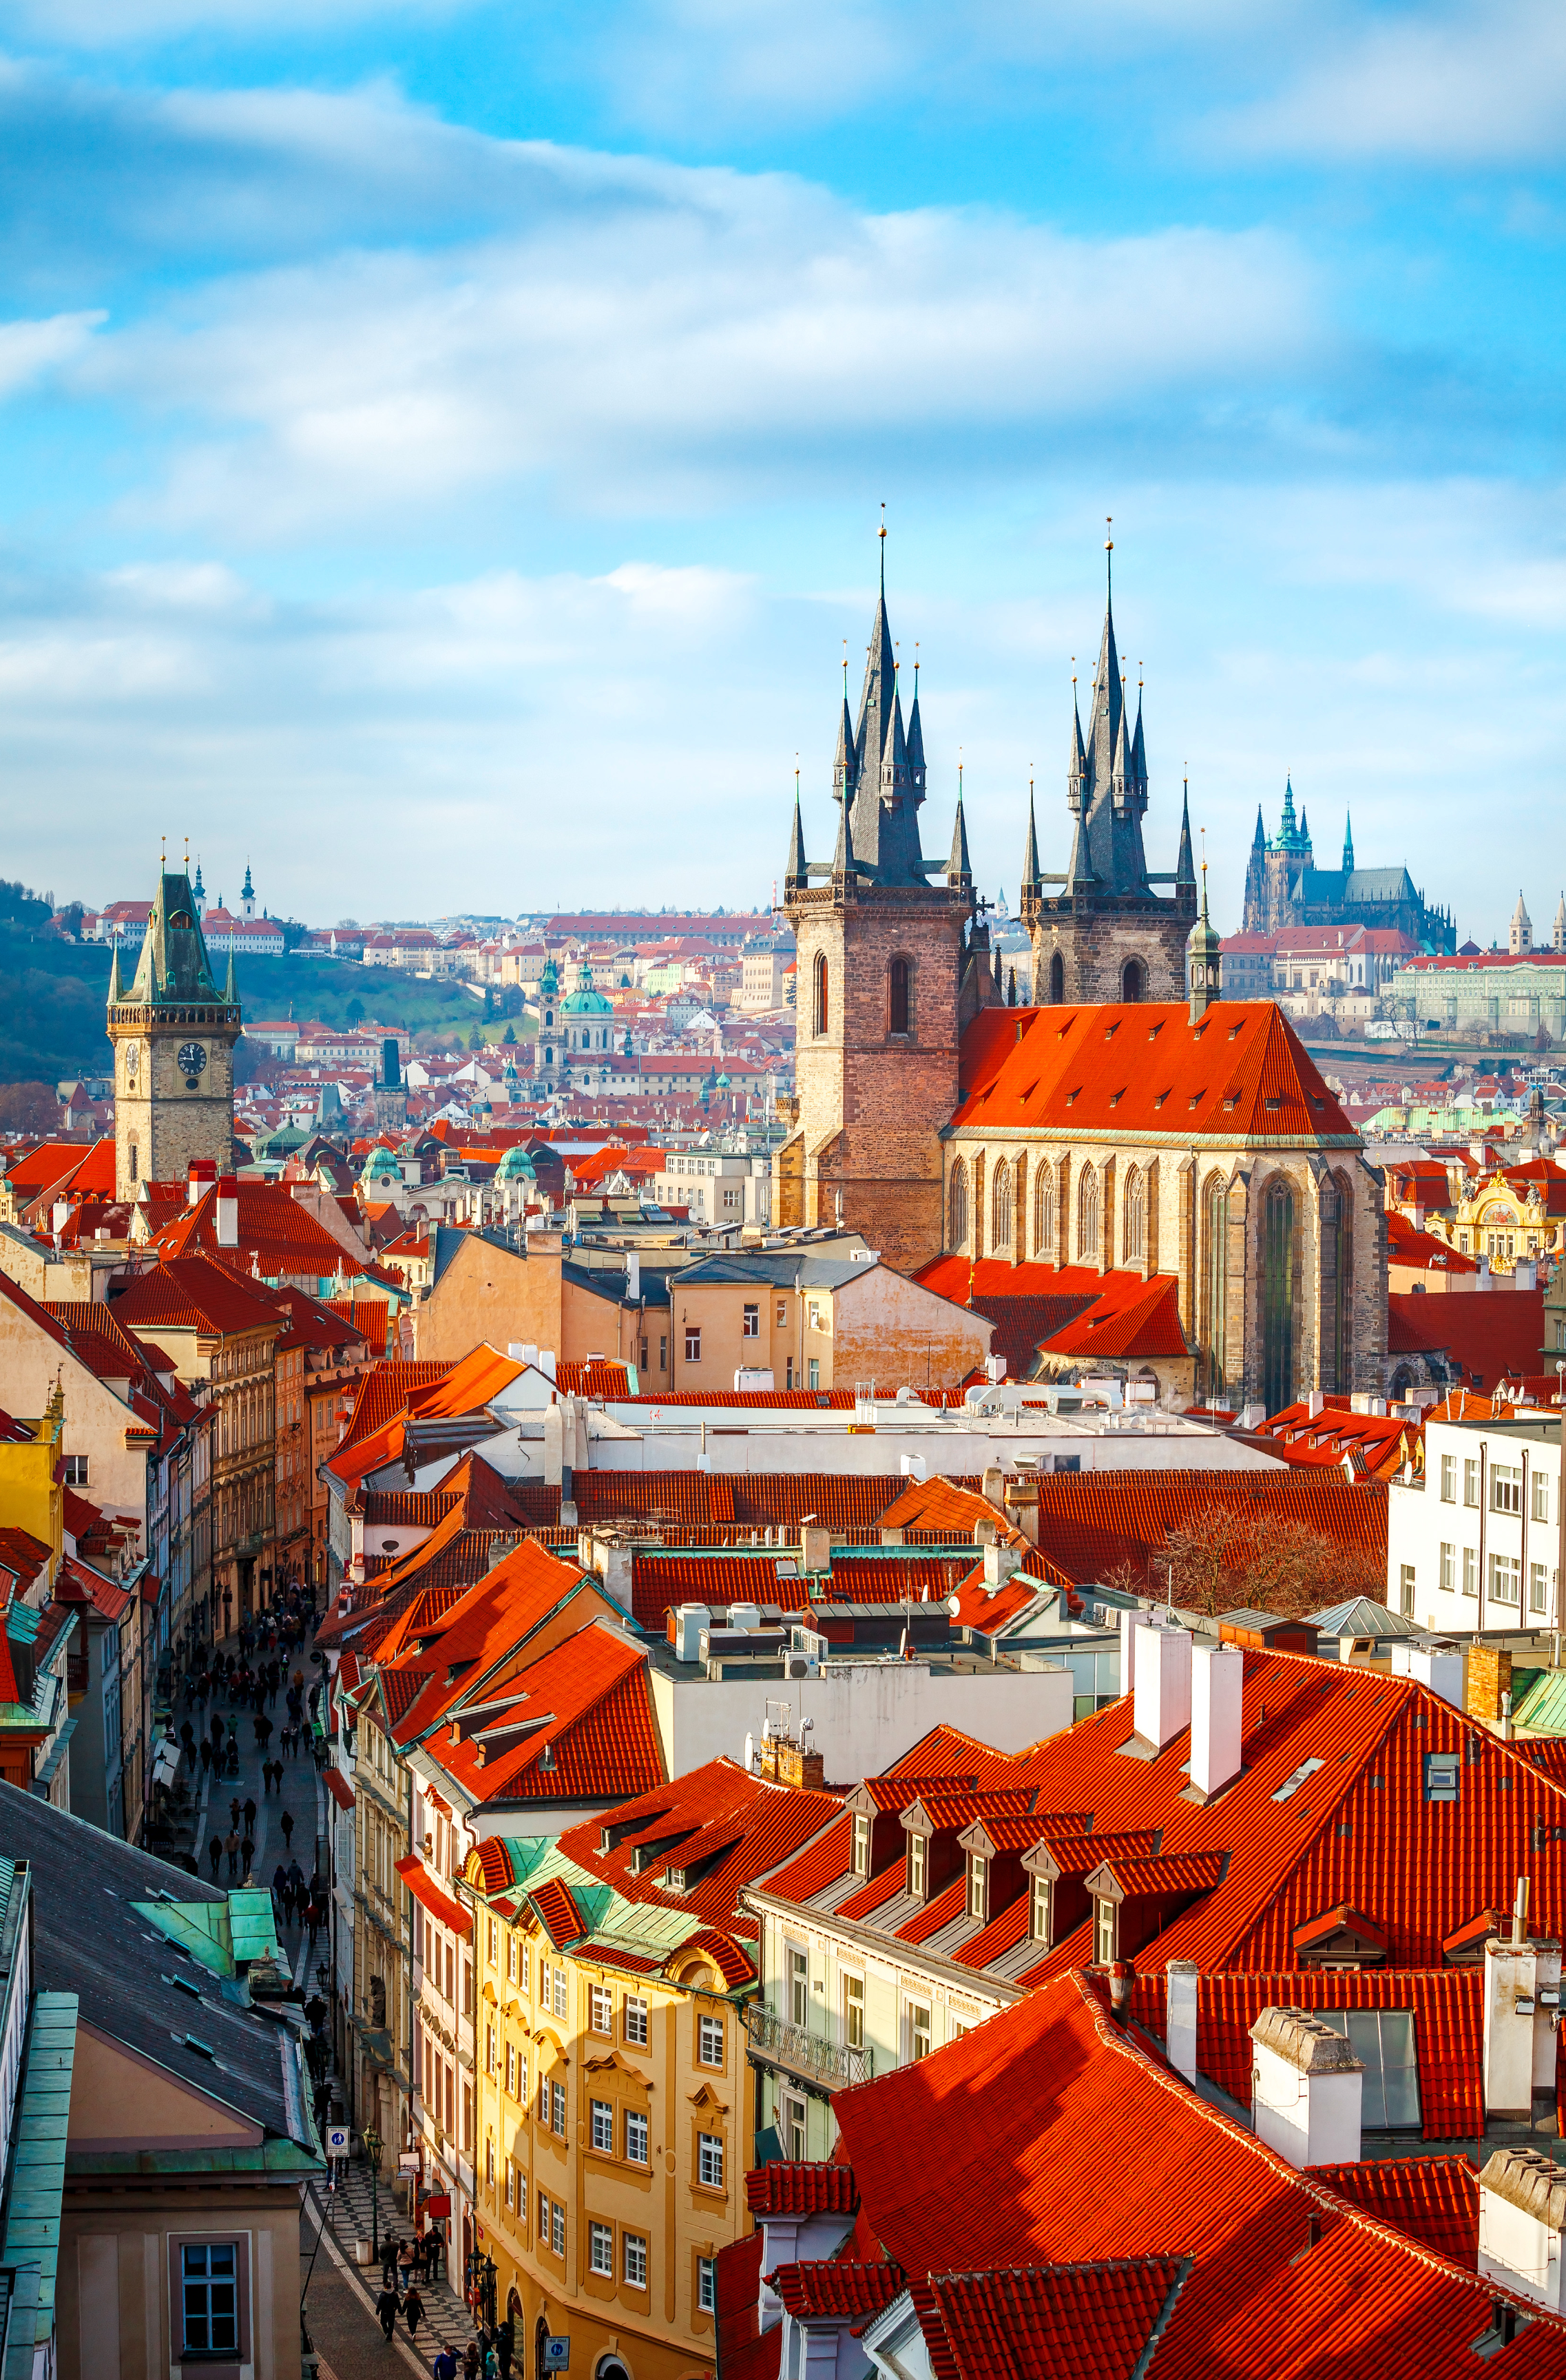 Come and discover the magic of Prague!